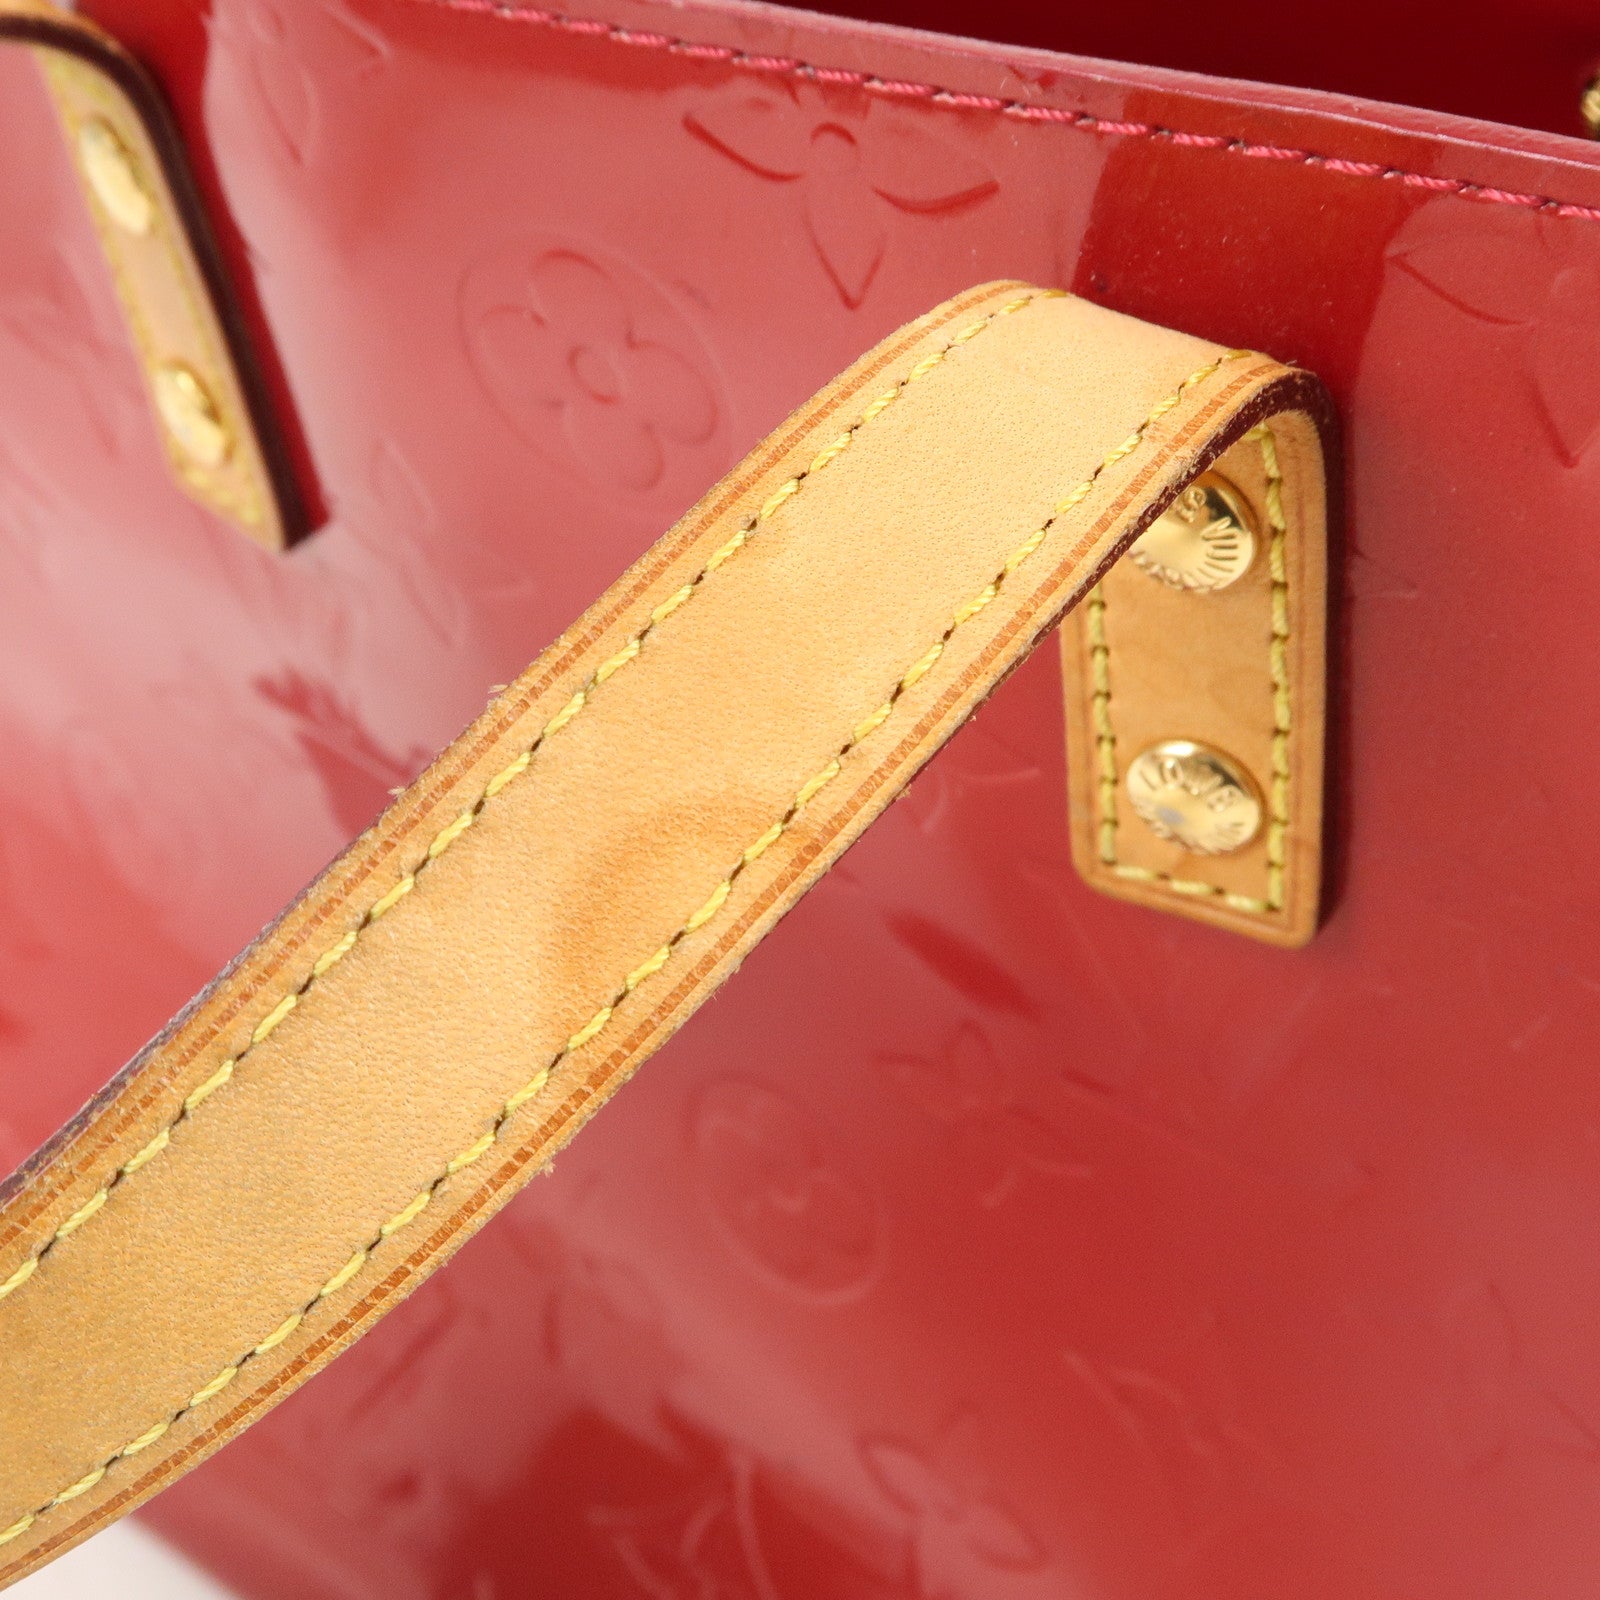 red and gold louis vuittons handbags